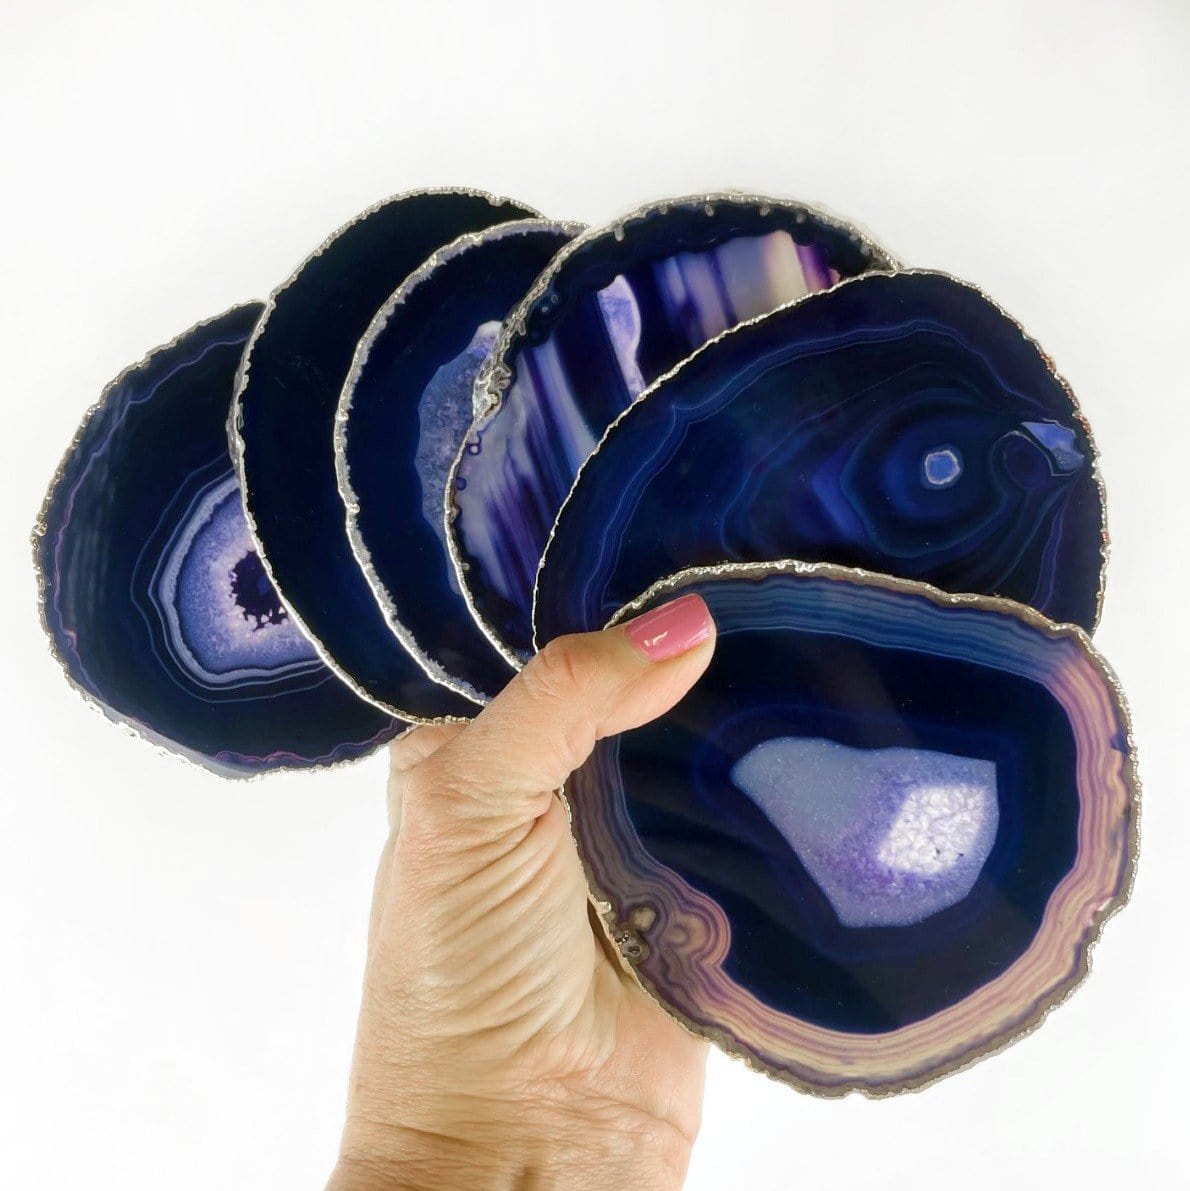 Purple Agate Coasters Set - 24k Gold or Silver Electroplated Edges--front shot view of coasters in hand for size comparison.